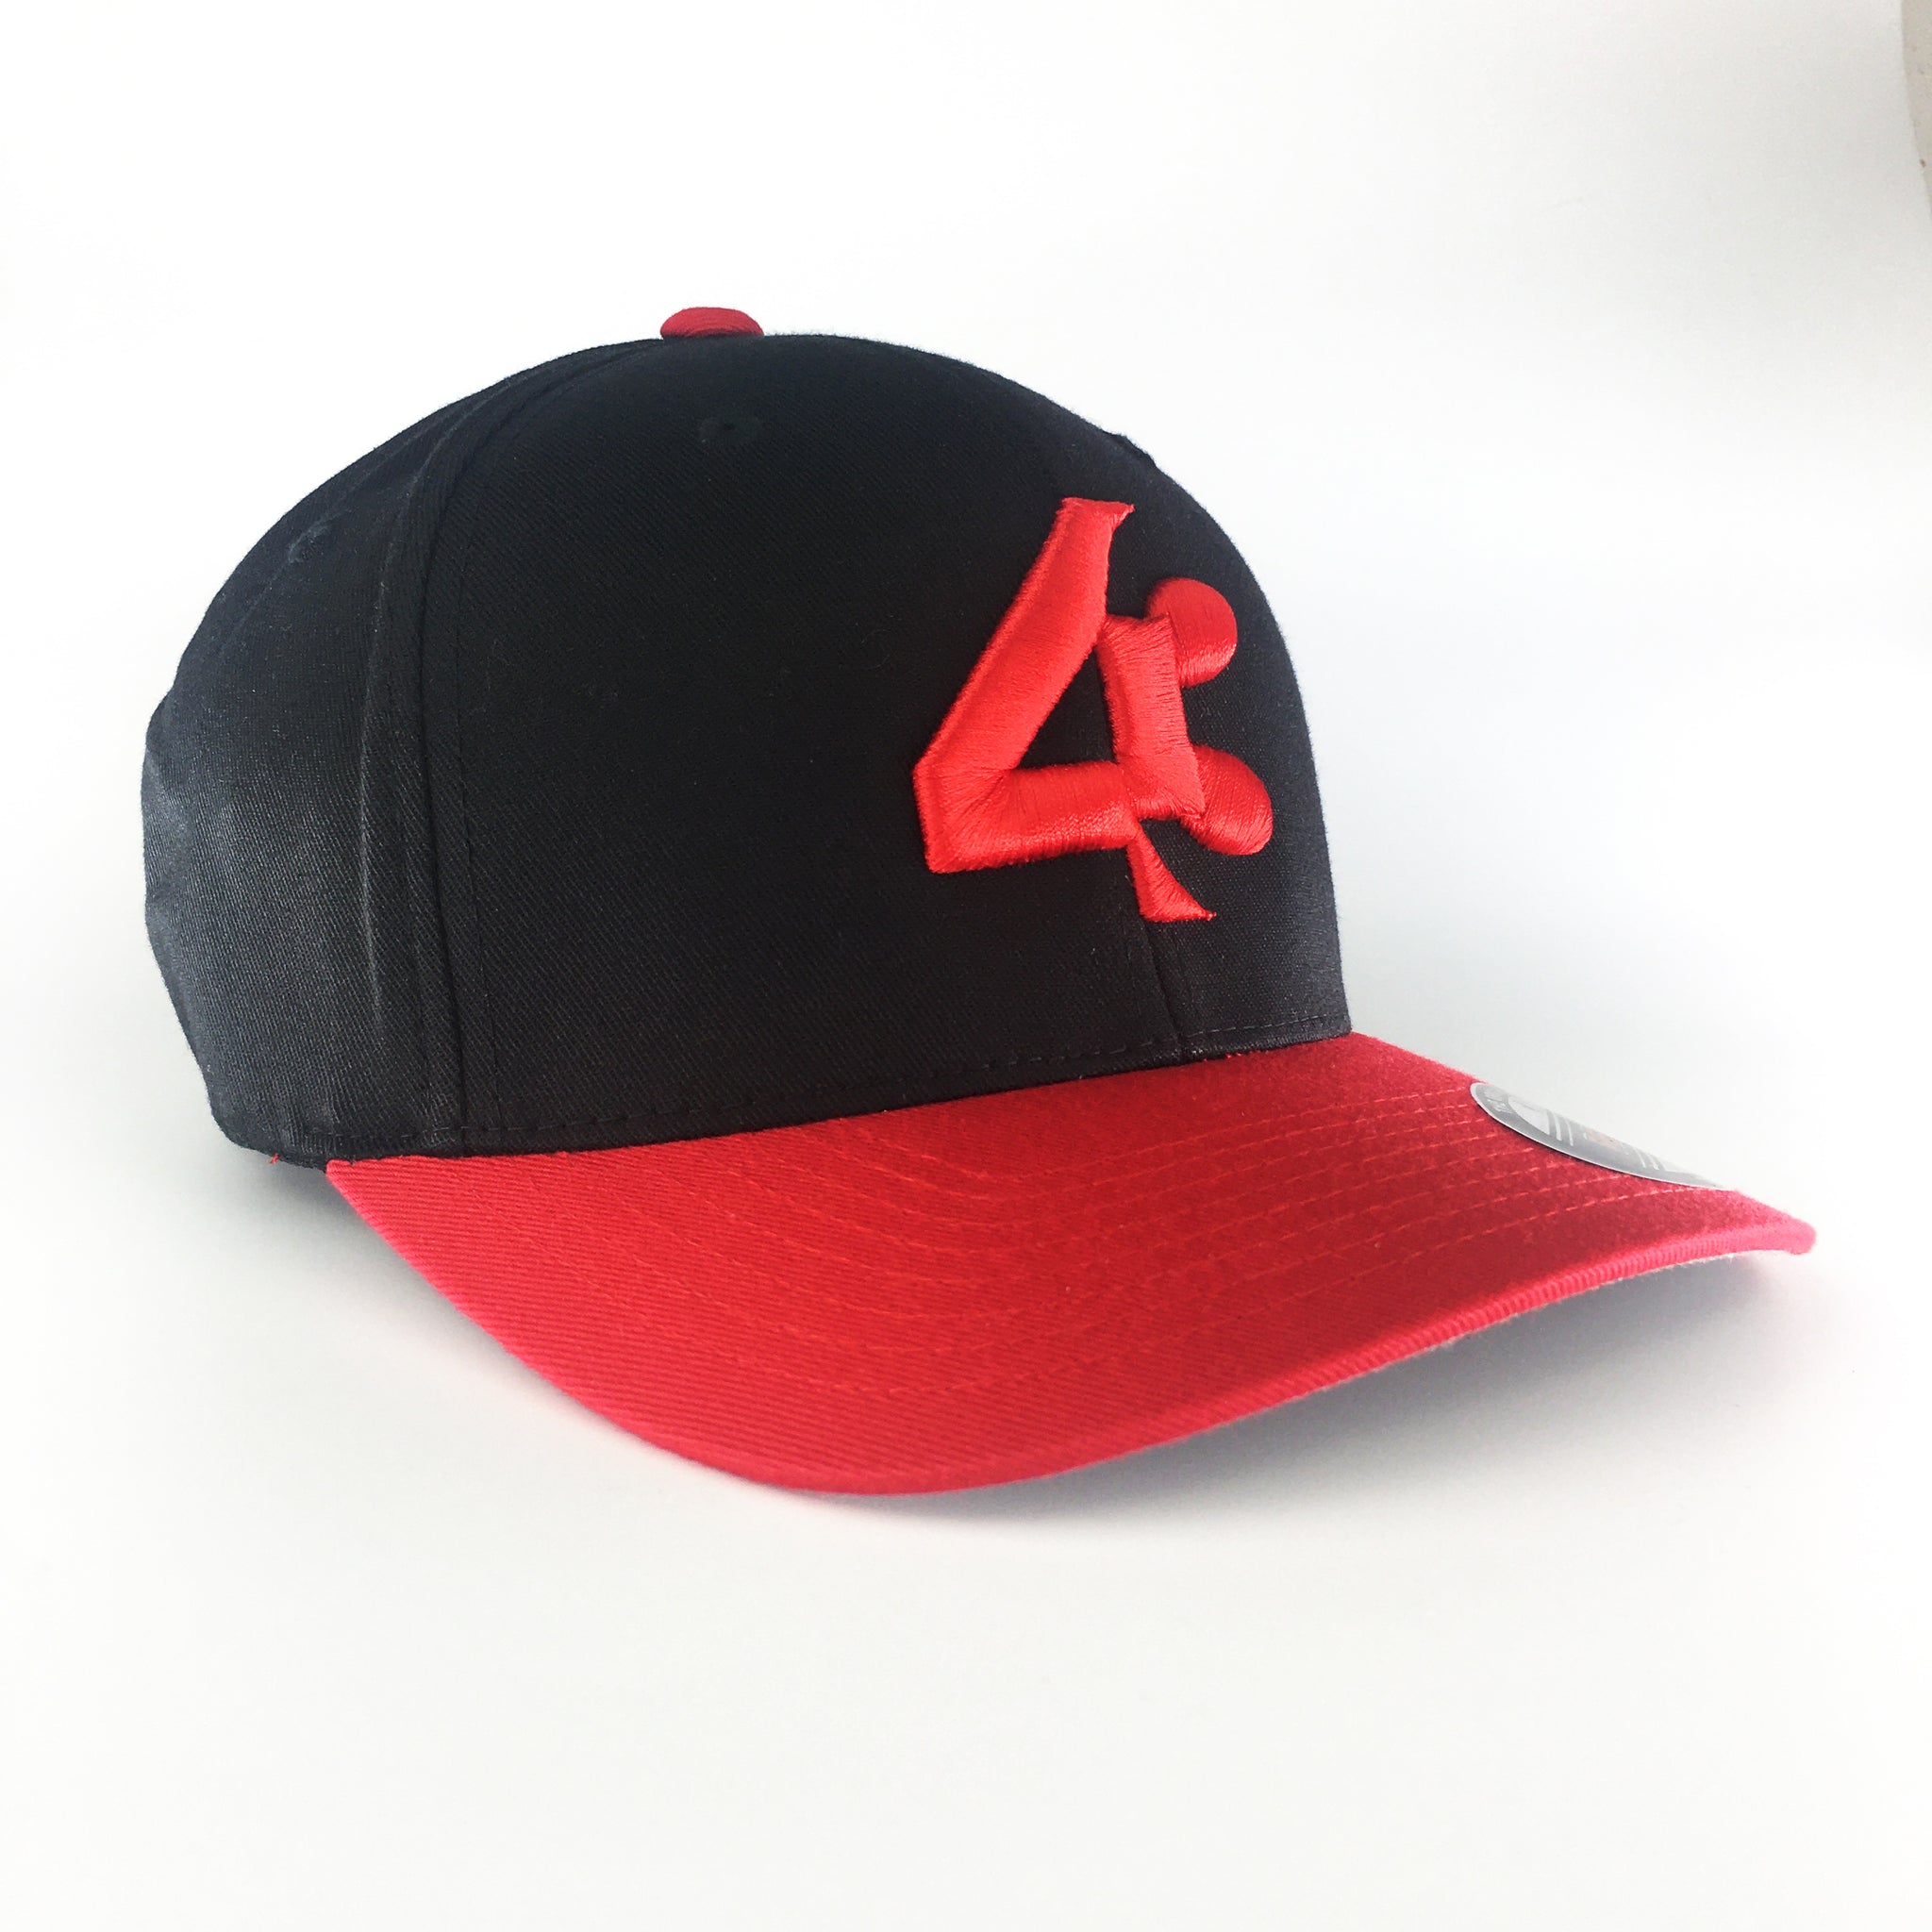 43 Red and Black two toned – Fitted FortyThree™ USA Flexfit